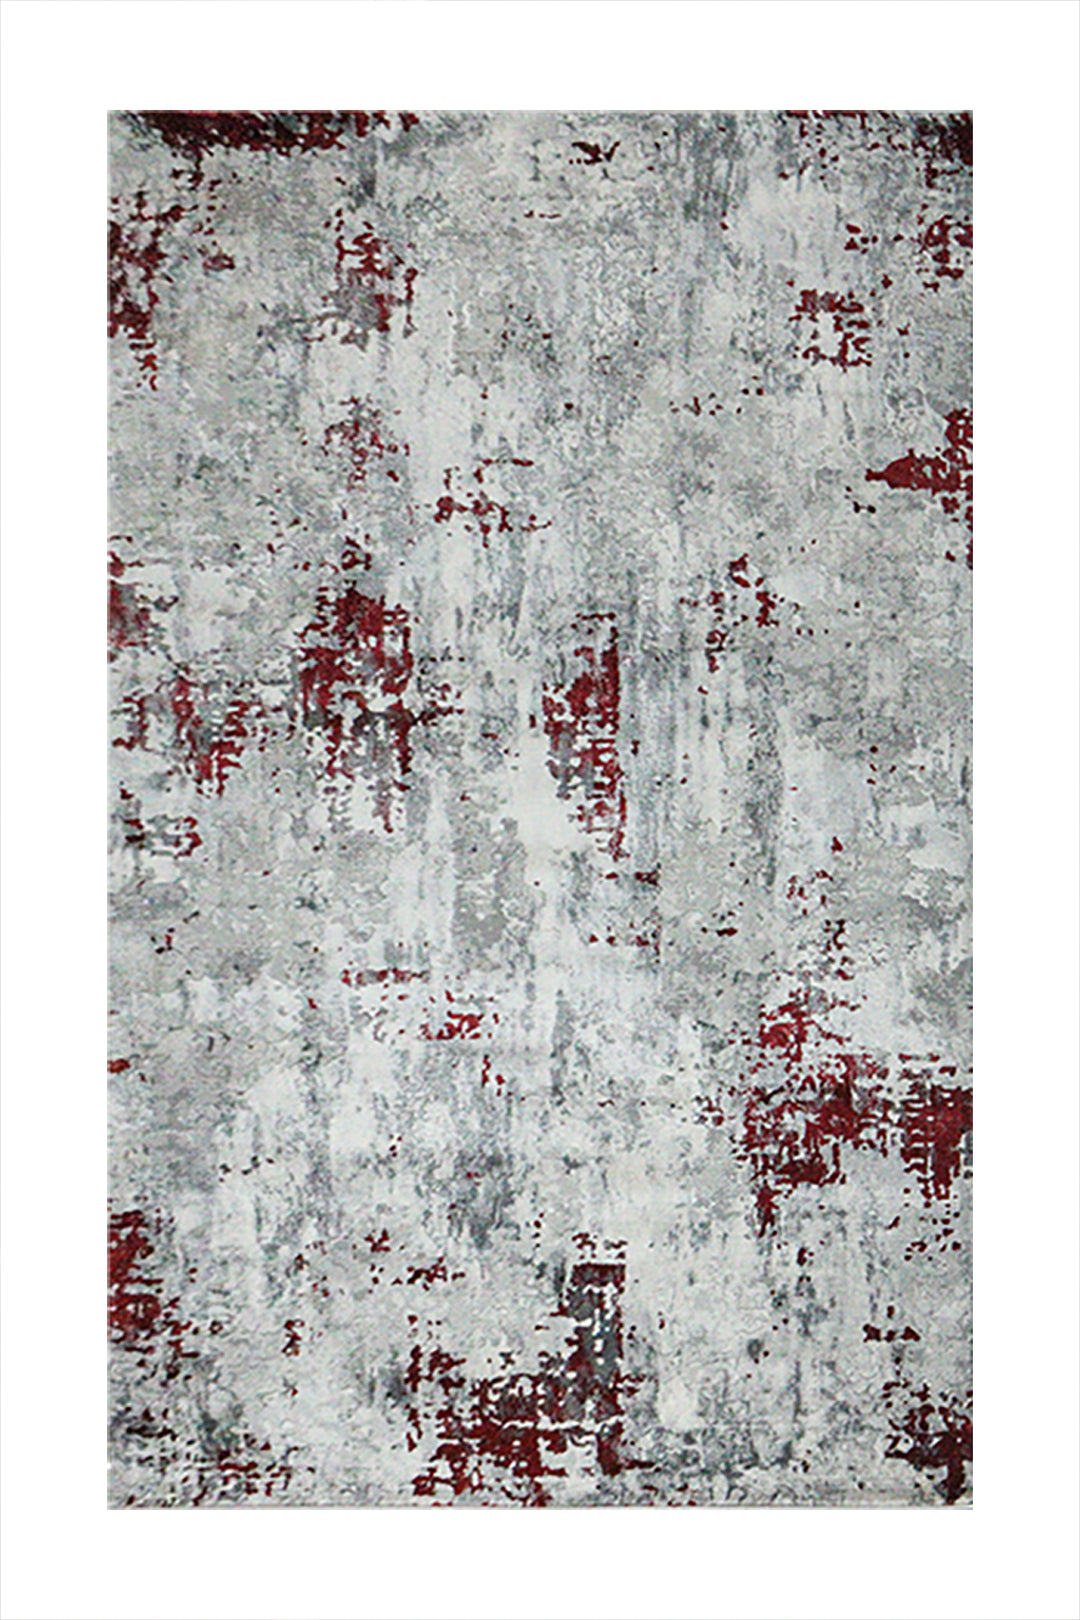 Turkish Modern Festival 1 Rug - 5.2 x 7.5 FT - Red and Gray - Sleek and Minimalist for Chic Interiors